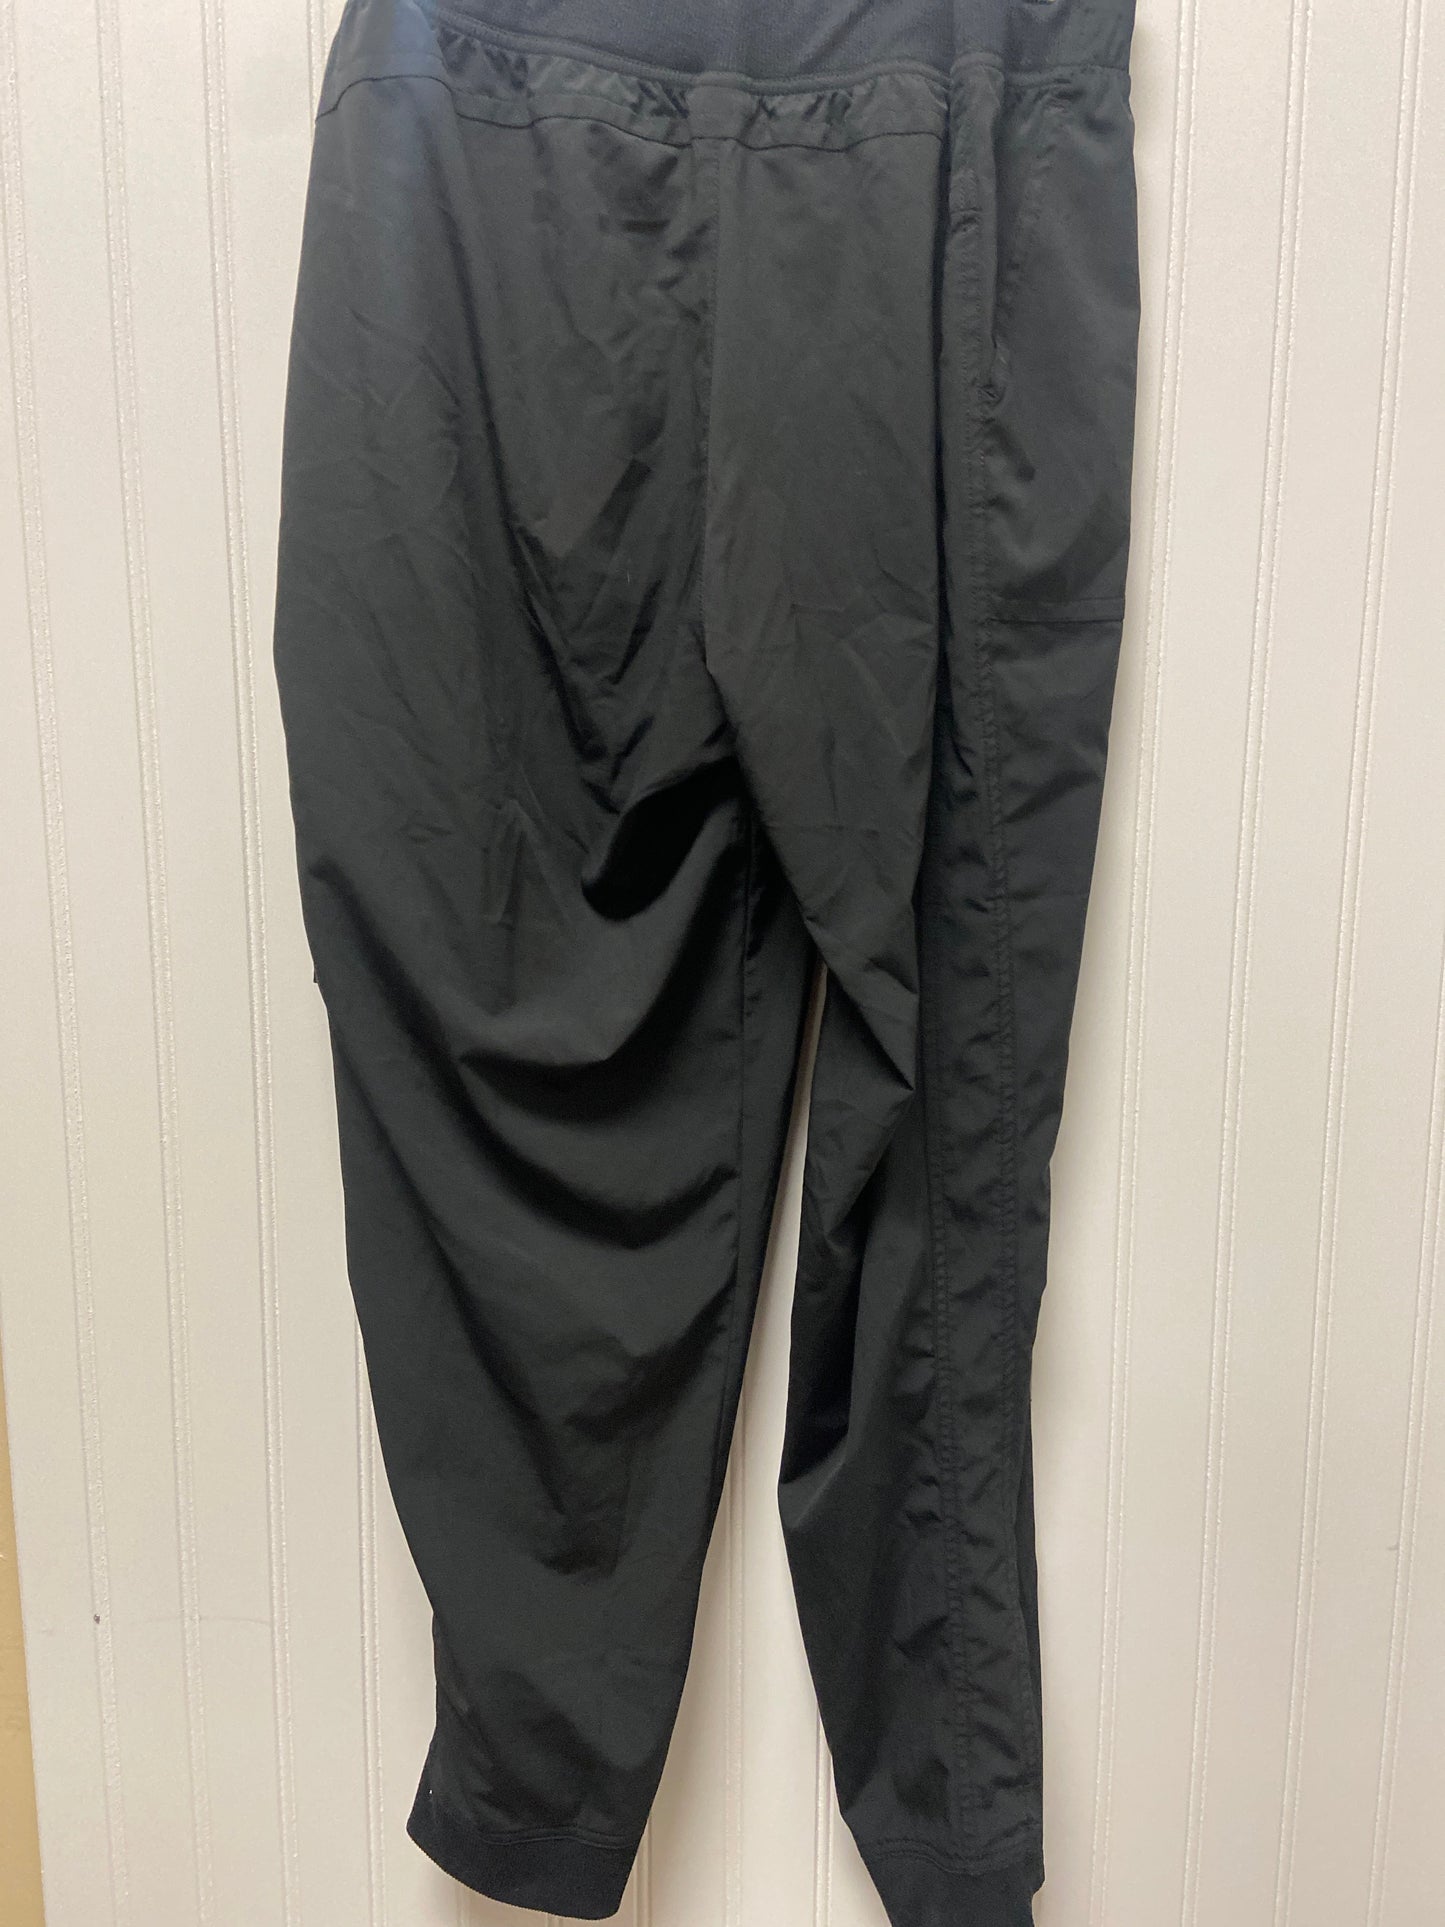 Athletic Pants By Champion  Size: 1x